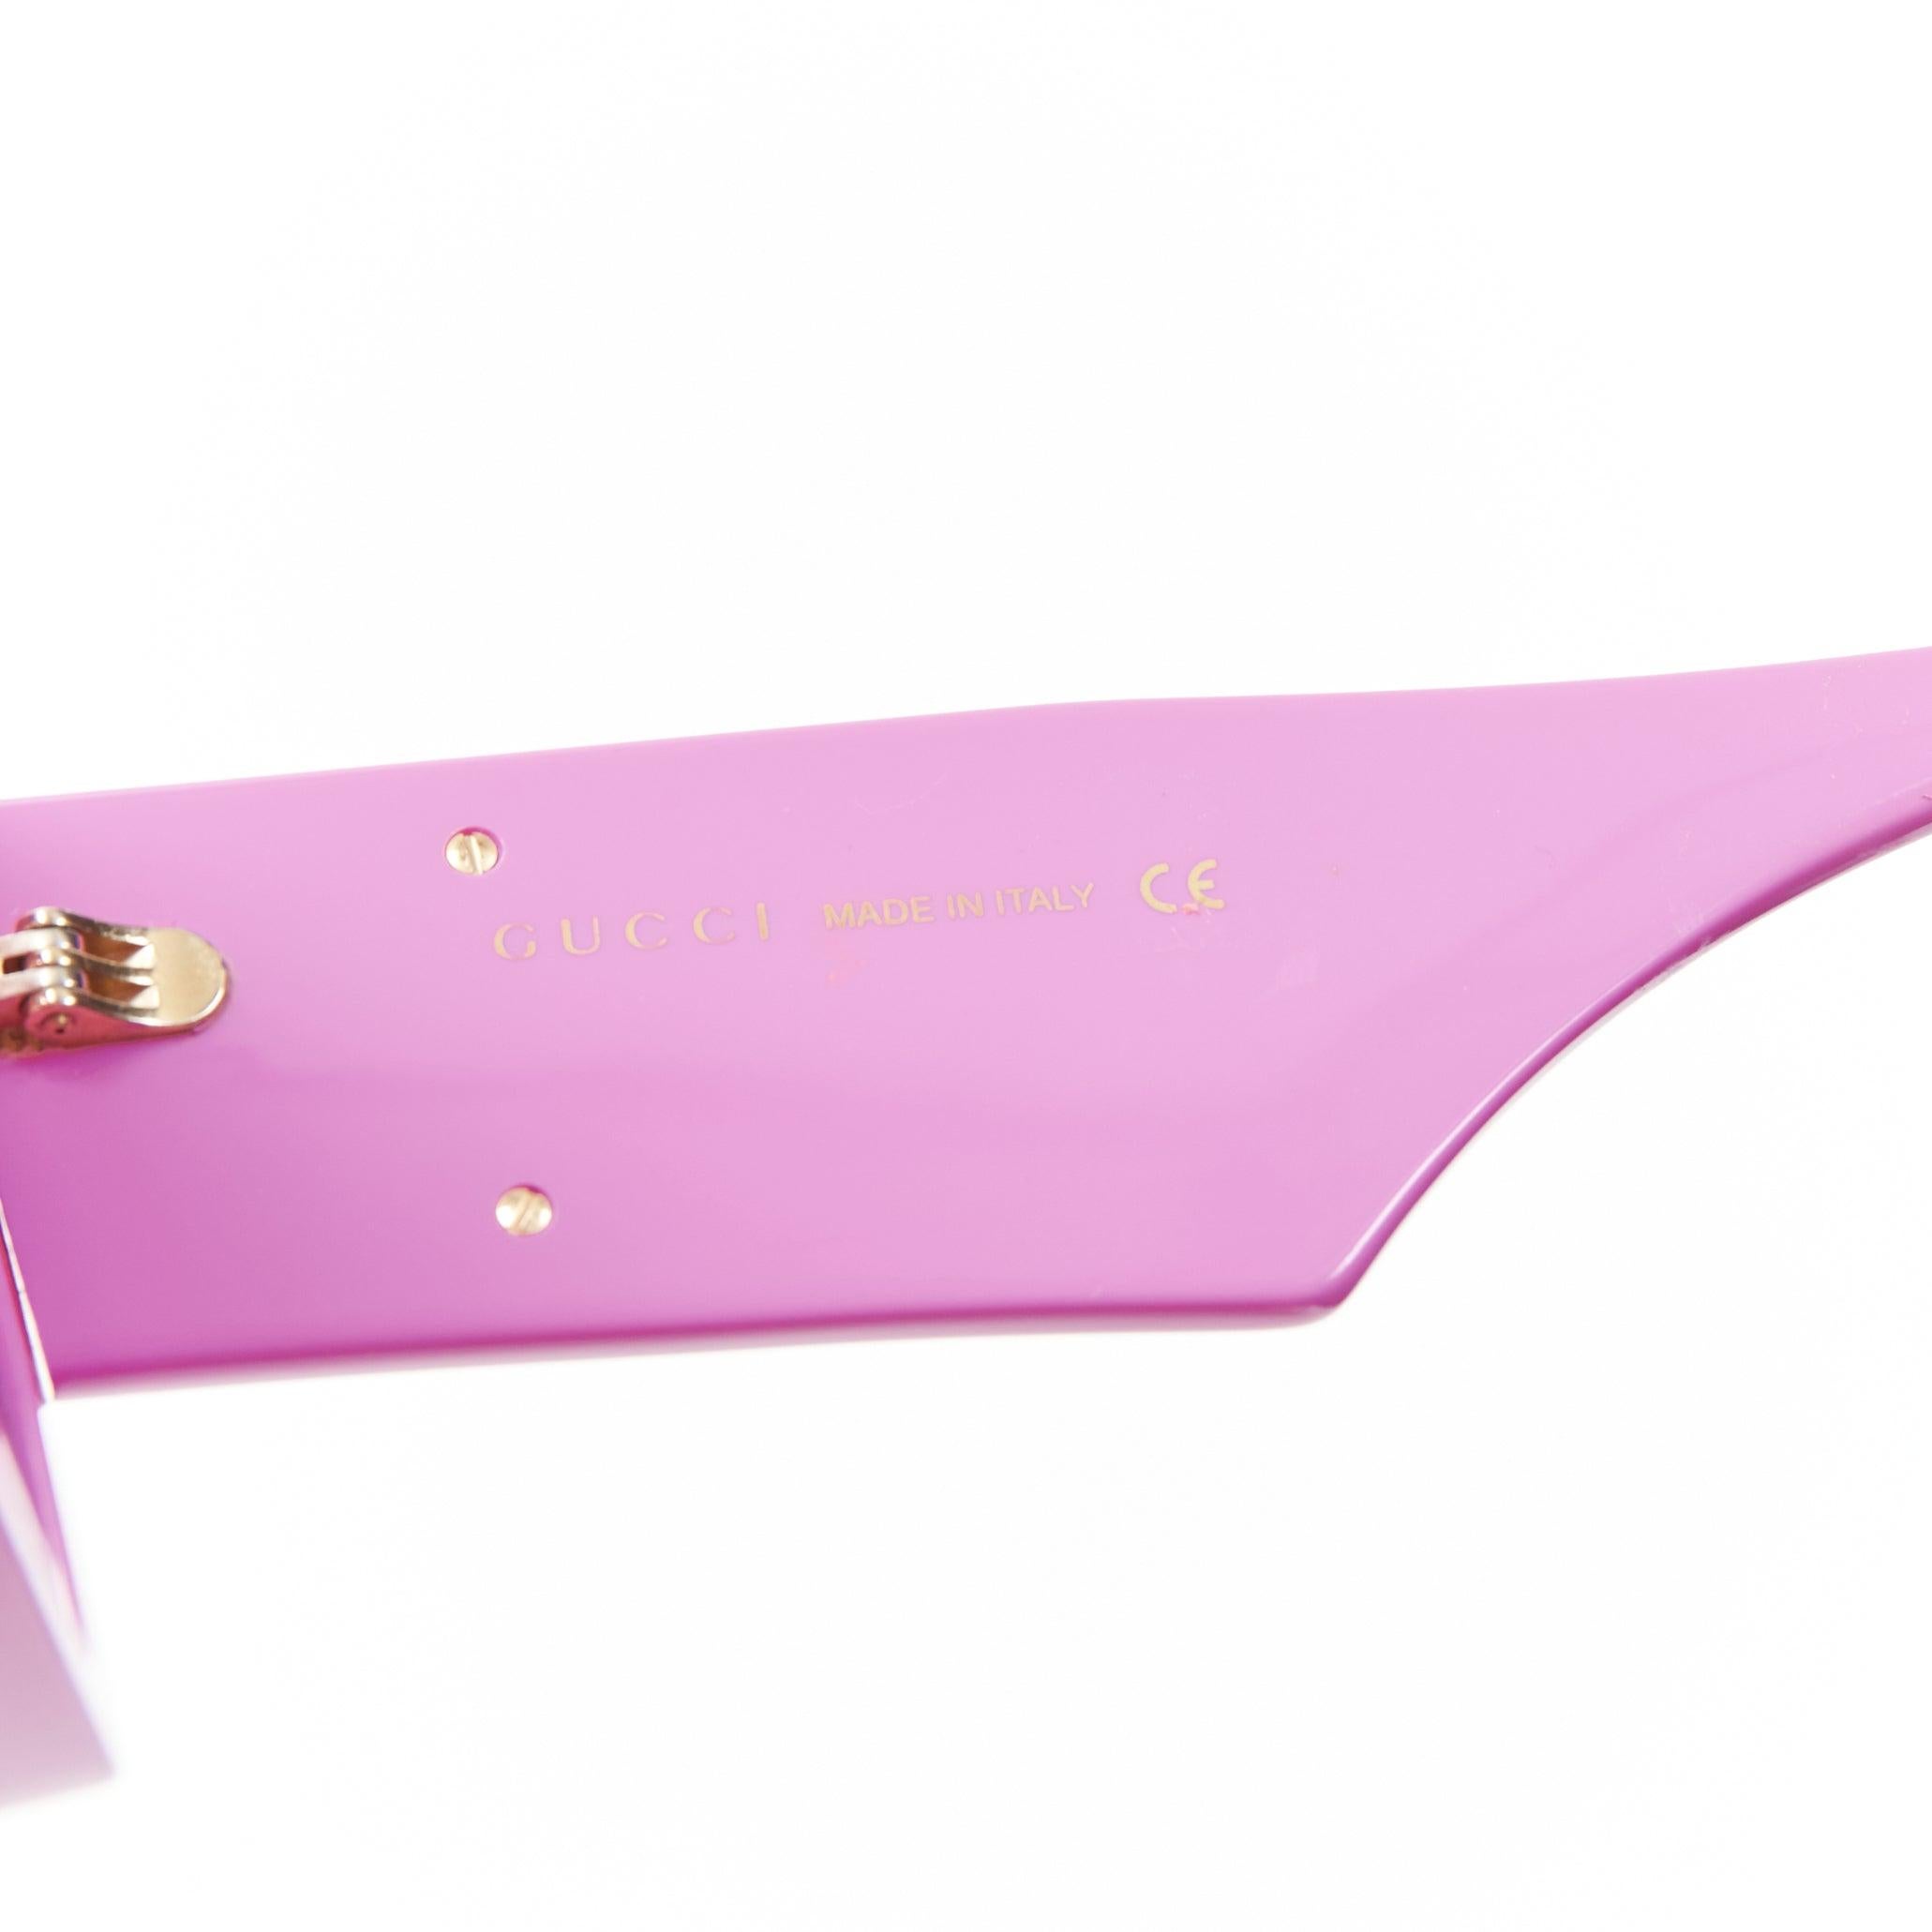 GUCCI Alessandro Michele GG0956S pink GG logo square frame oversized sunglasses For Sale 2